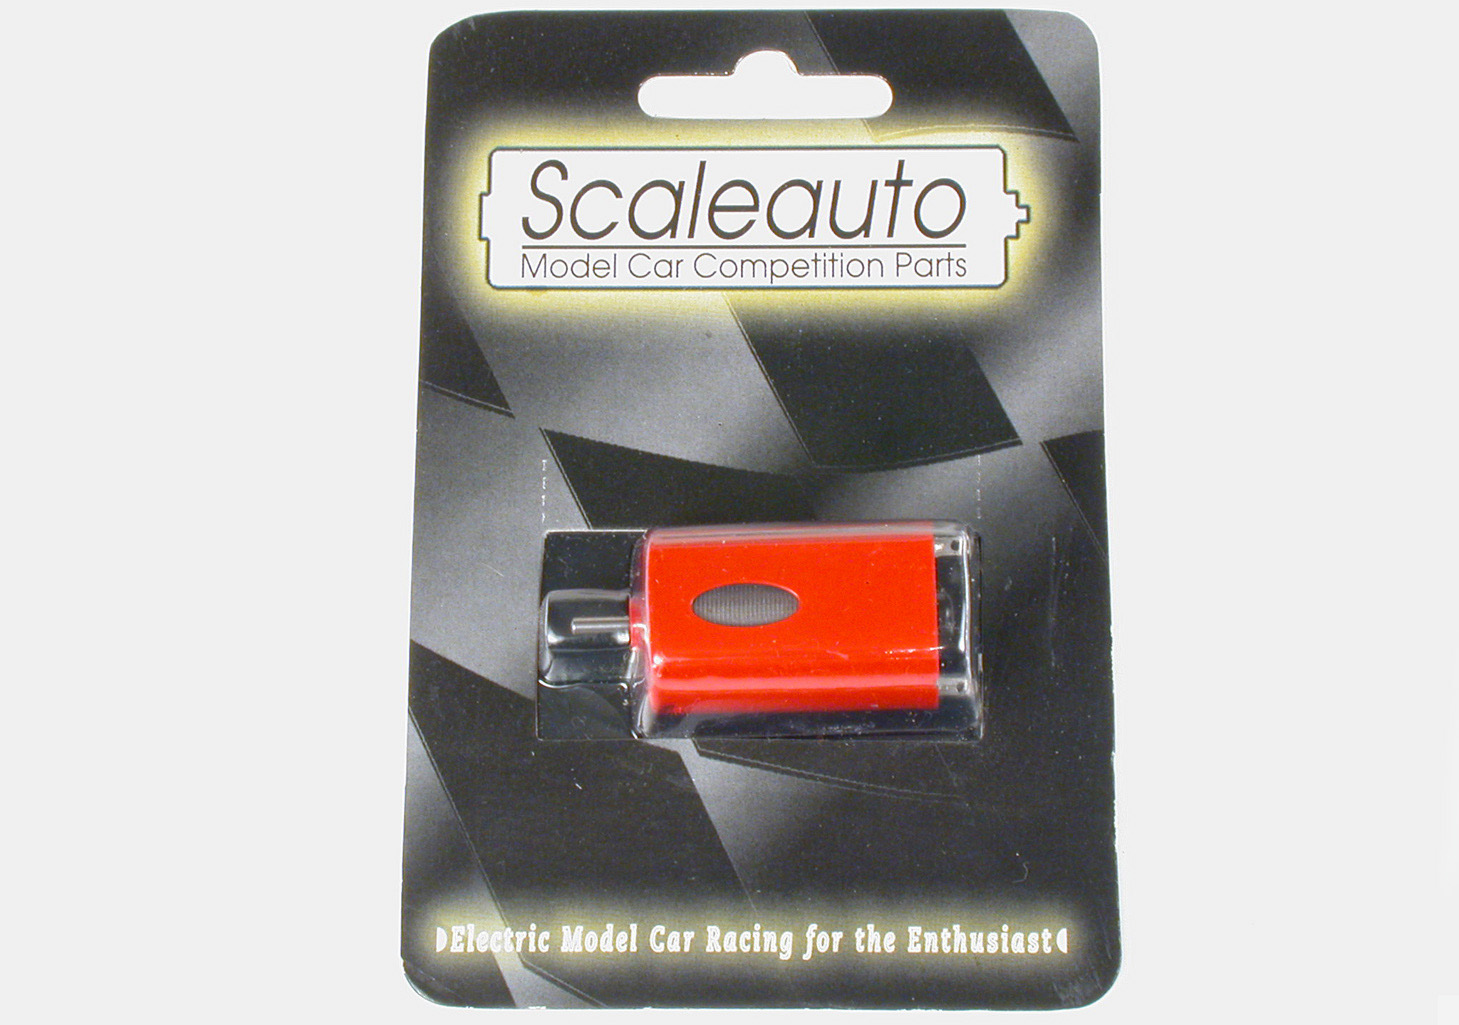 Scaleauto New Products